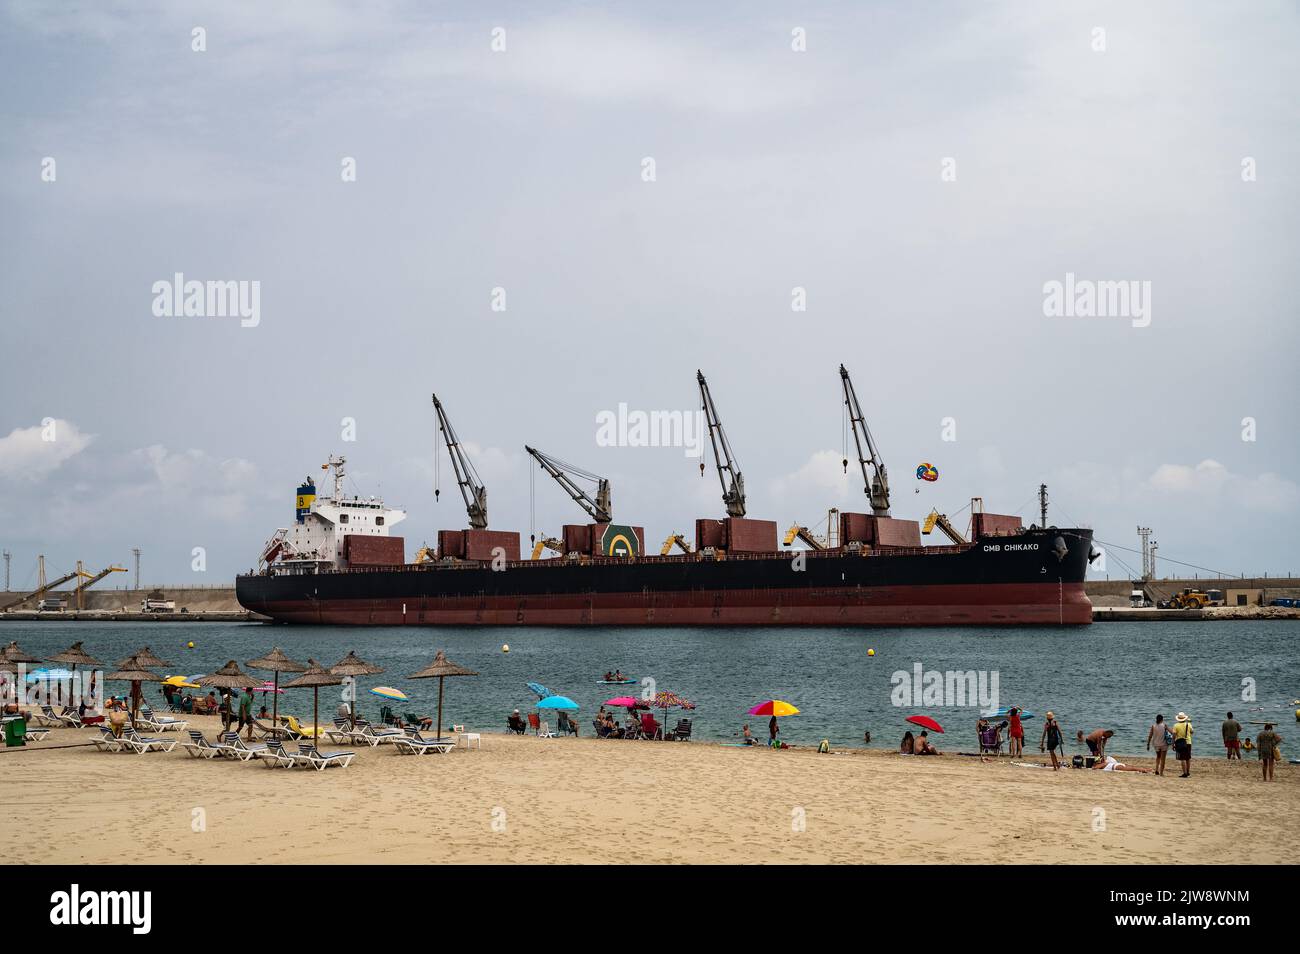 Tourists and locals enjoy a summer day at Garrucha Beach, in the province of Almeria, south of Spain, while a cargo ship is at the port Stock Photo